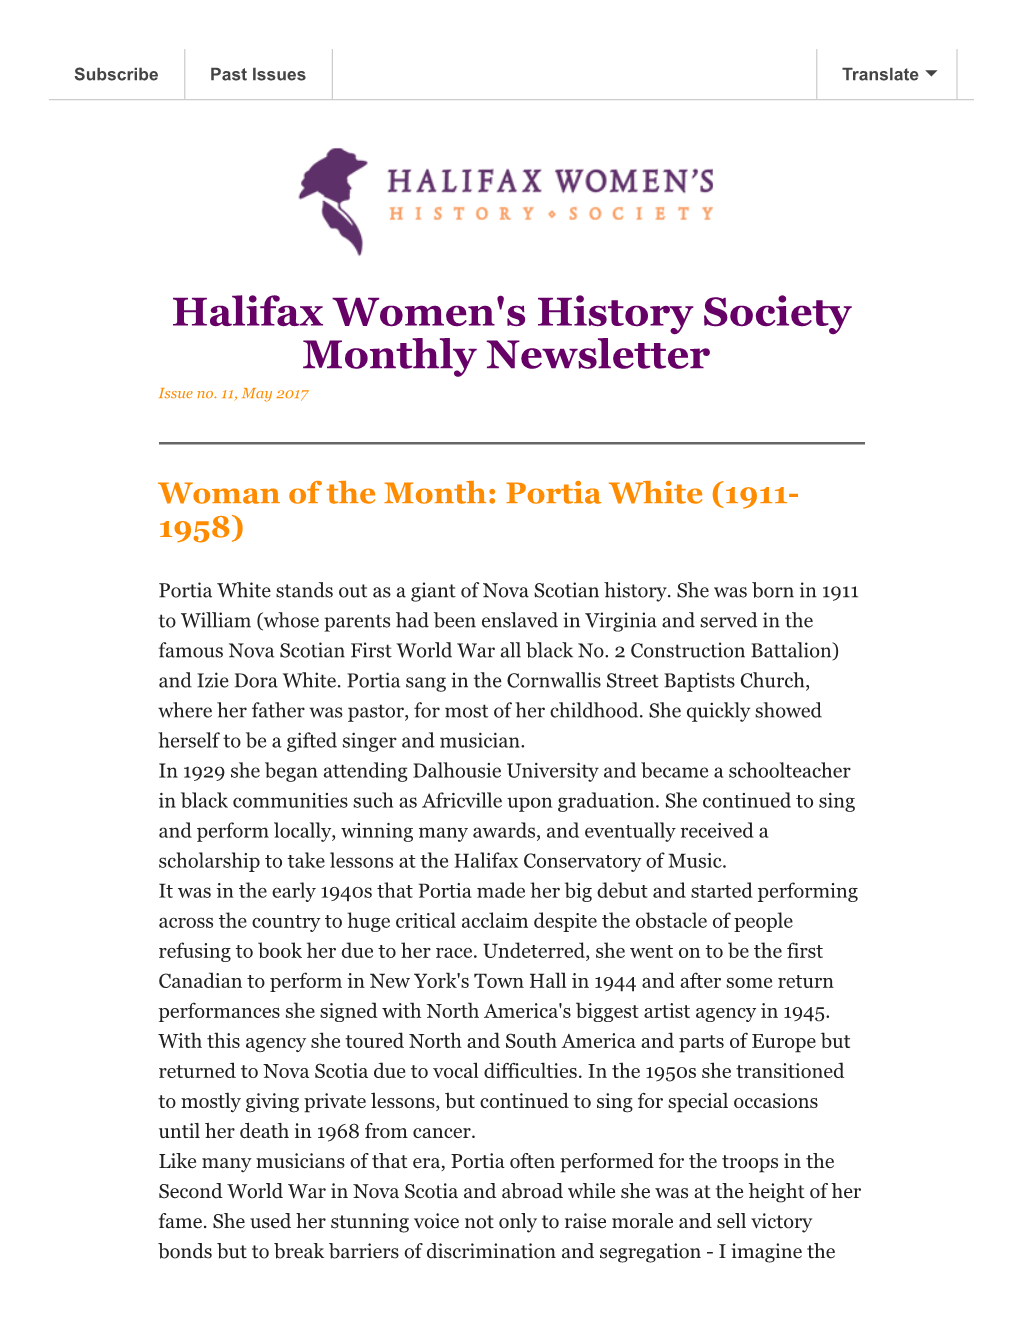 Halifax Women's History Society Monthly Newsletter Issue No